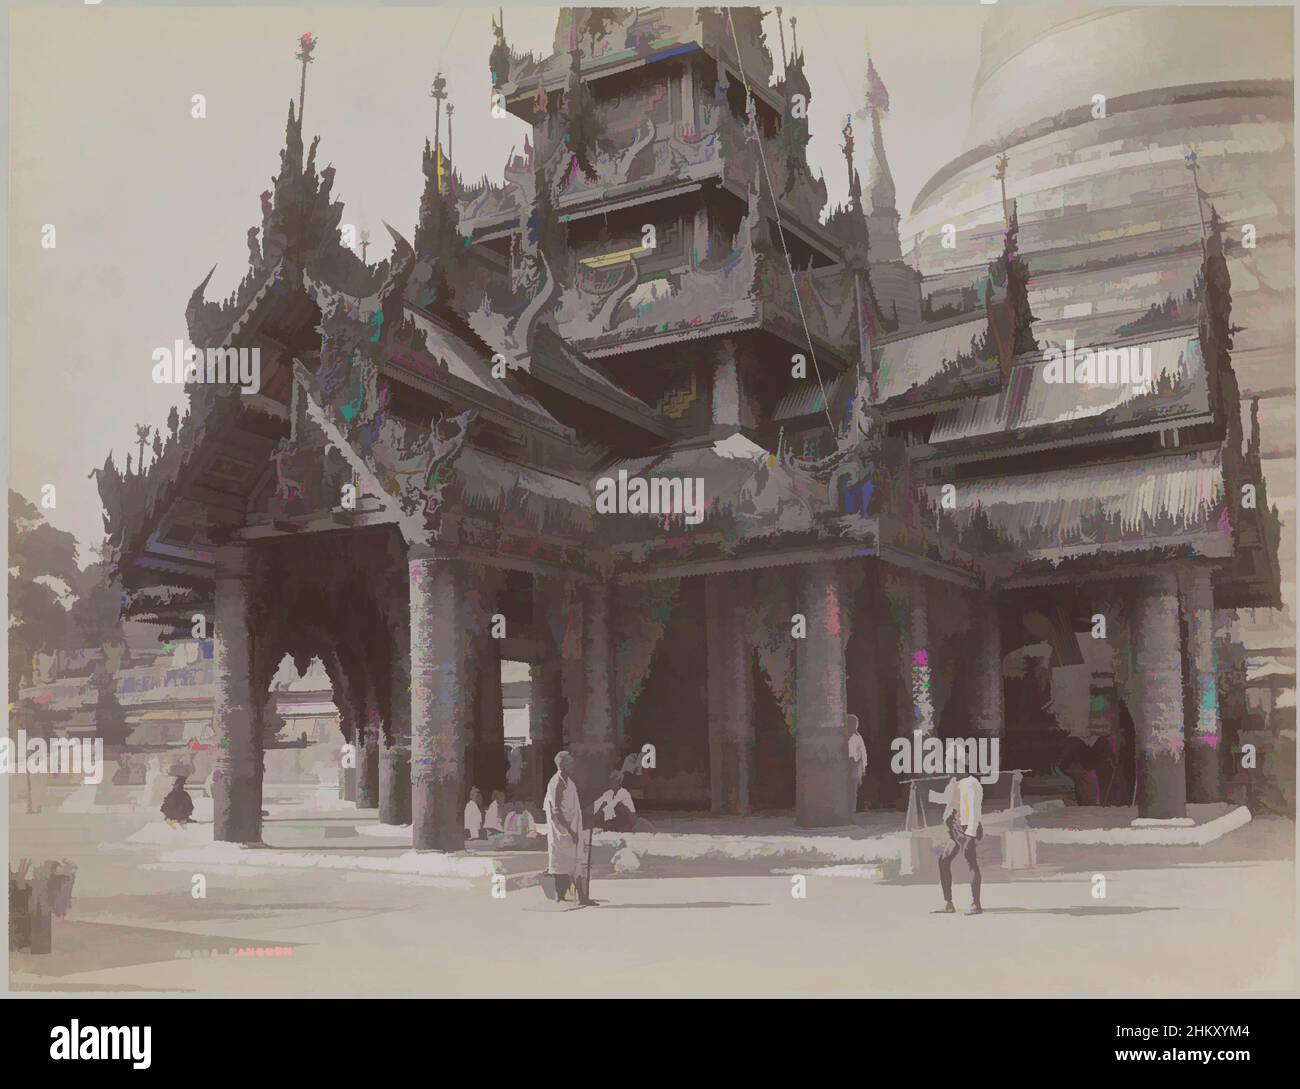 Art inspired by Shwedagon pagoda, Rangoon, Shrine S. D Pagoda Rangoon, Shrine., P. Klier, Yangon, c. 1895 - c. 1915, photographic support, paper, albumen print, height 203 mm × width 265 mmheight 244 mm × width 329 mm, Classic works modernized by Artotop with a splash of modernity. Shapes, color and value, eye-catching visual impact on art. Emotions through freedom of artworks in a contemporary way. A timeless message pursuing a wildly creative new direction. Artists turning to the digital medium and creating the Artotop NFT Stock Photo